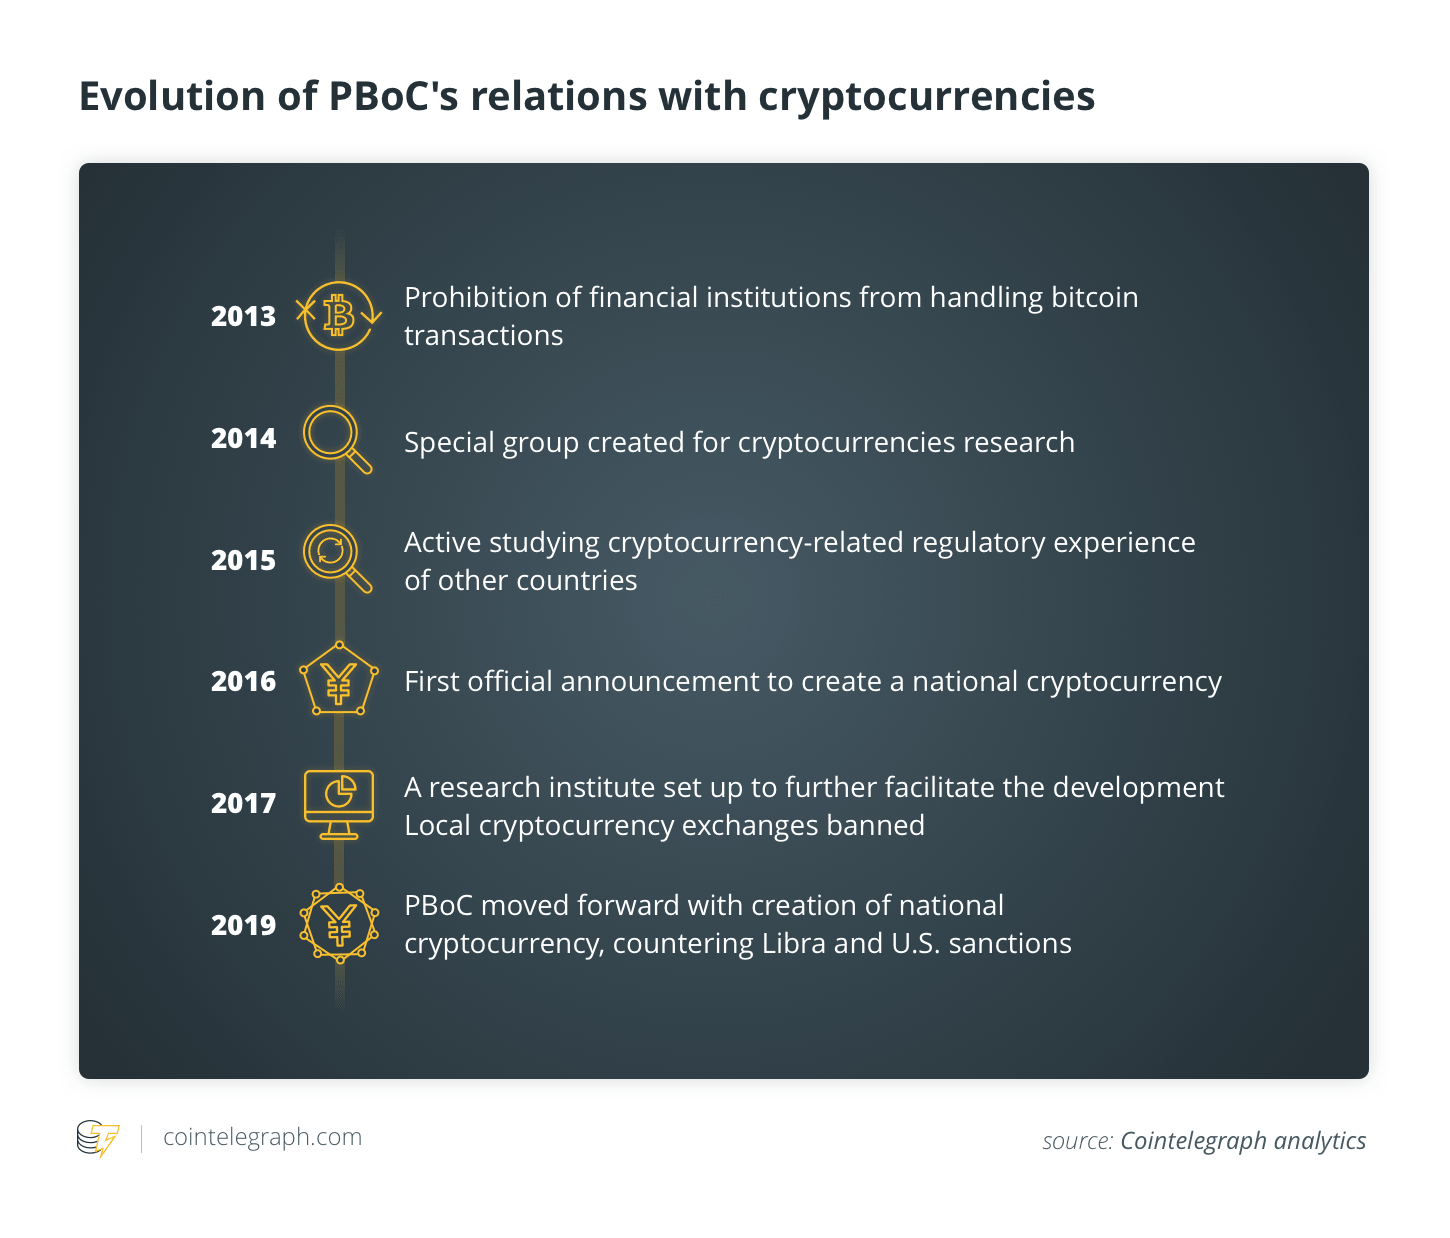 Evolution of PBoC's relations with cryptocurrencies